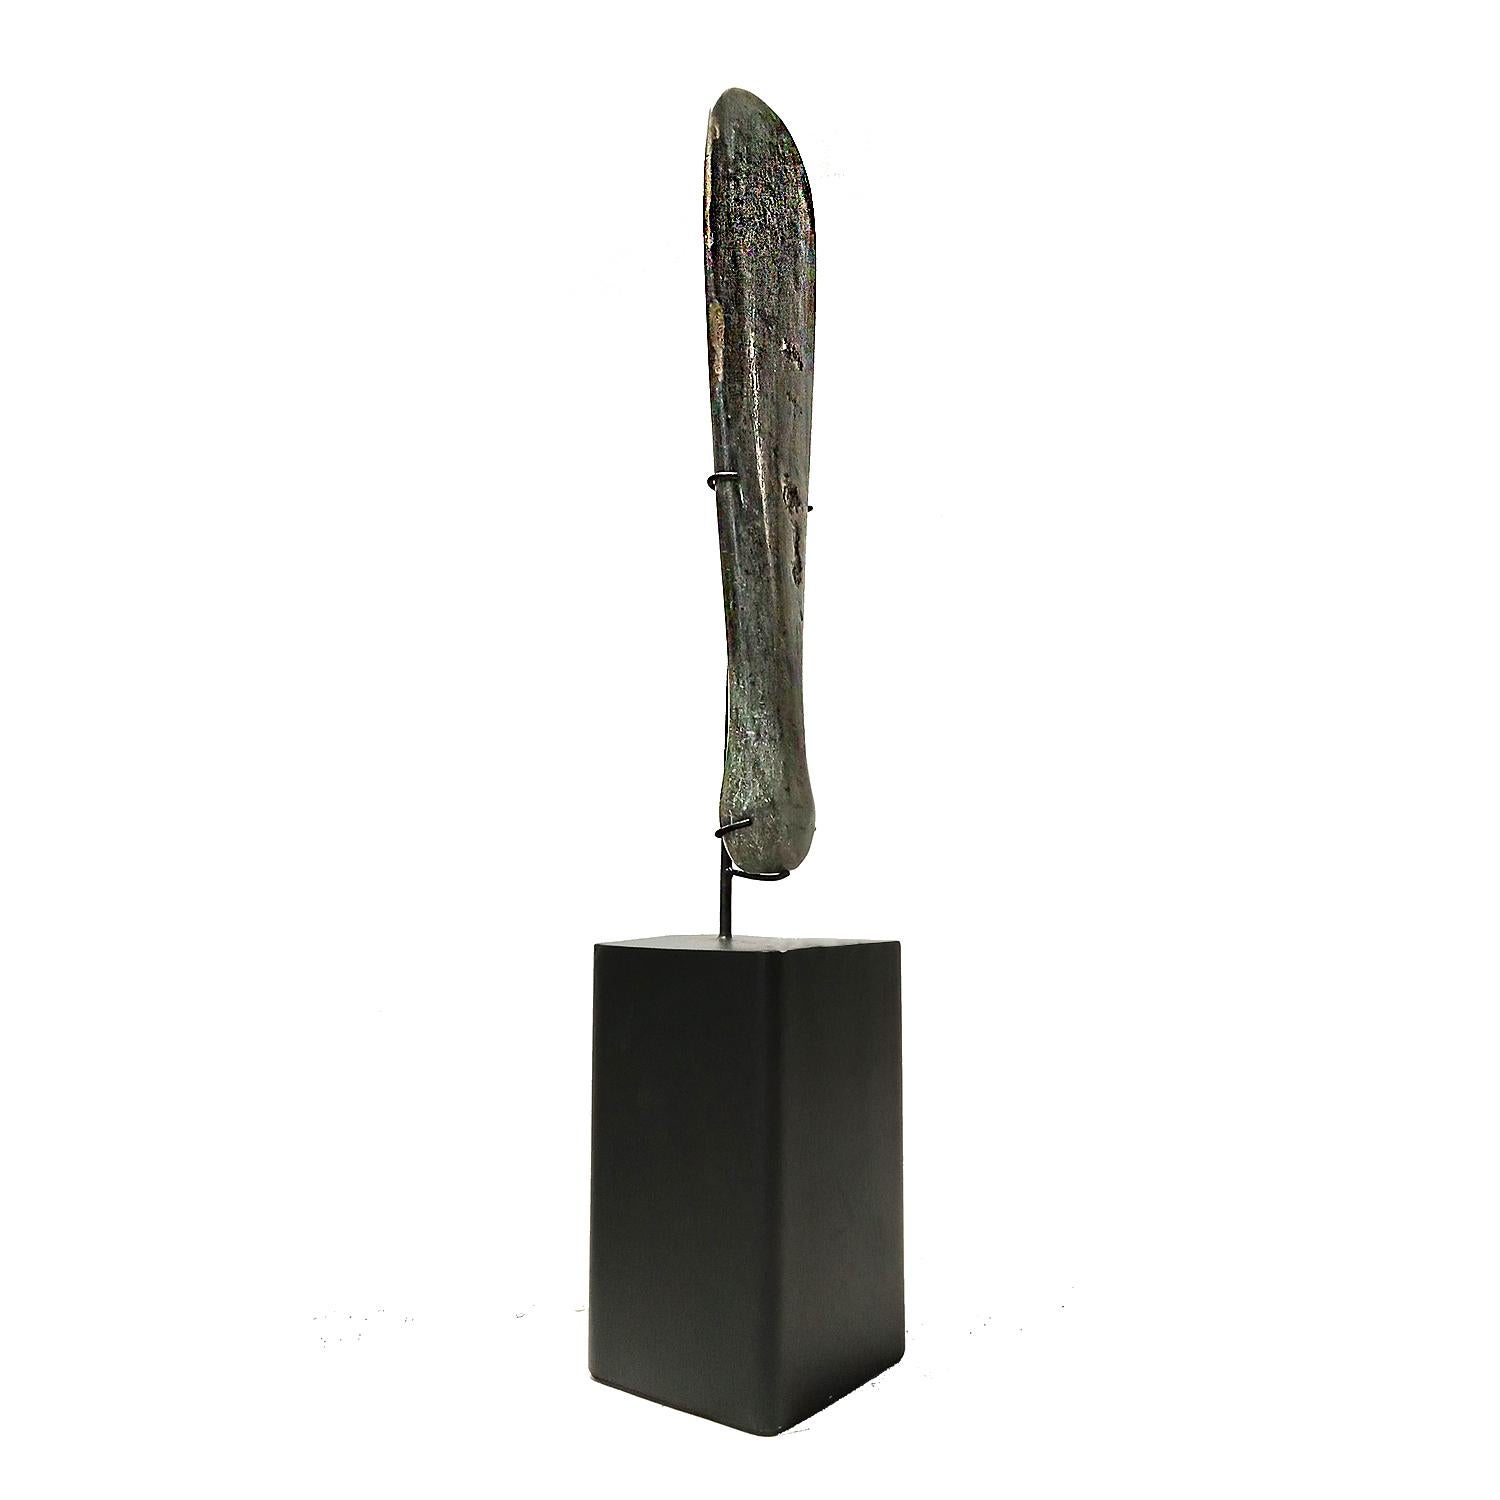 A hand-carved stone blade from Indonesia, mounted on a black stand. 

A small 